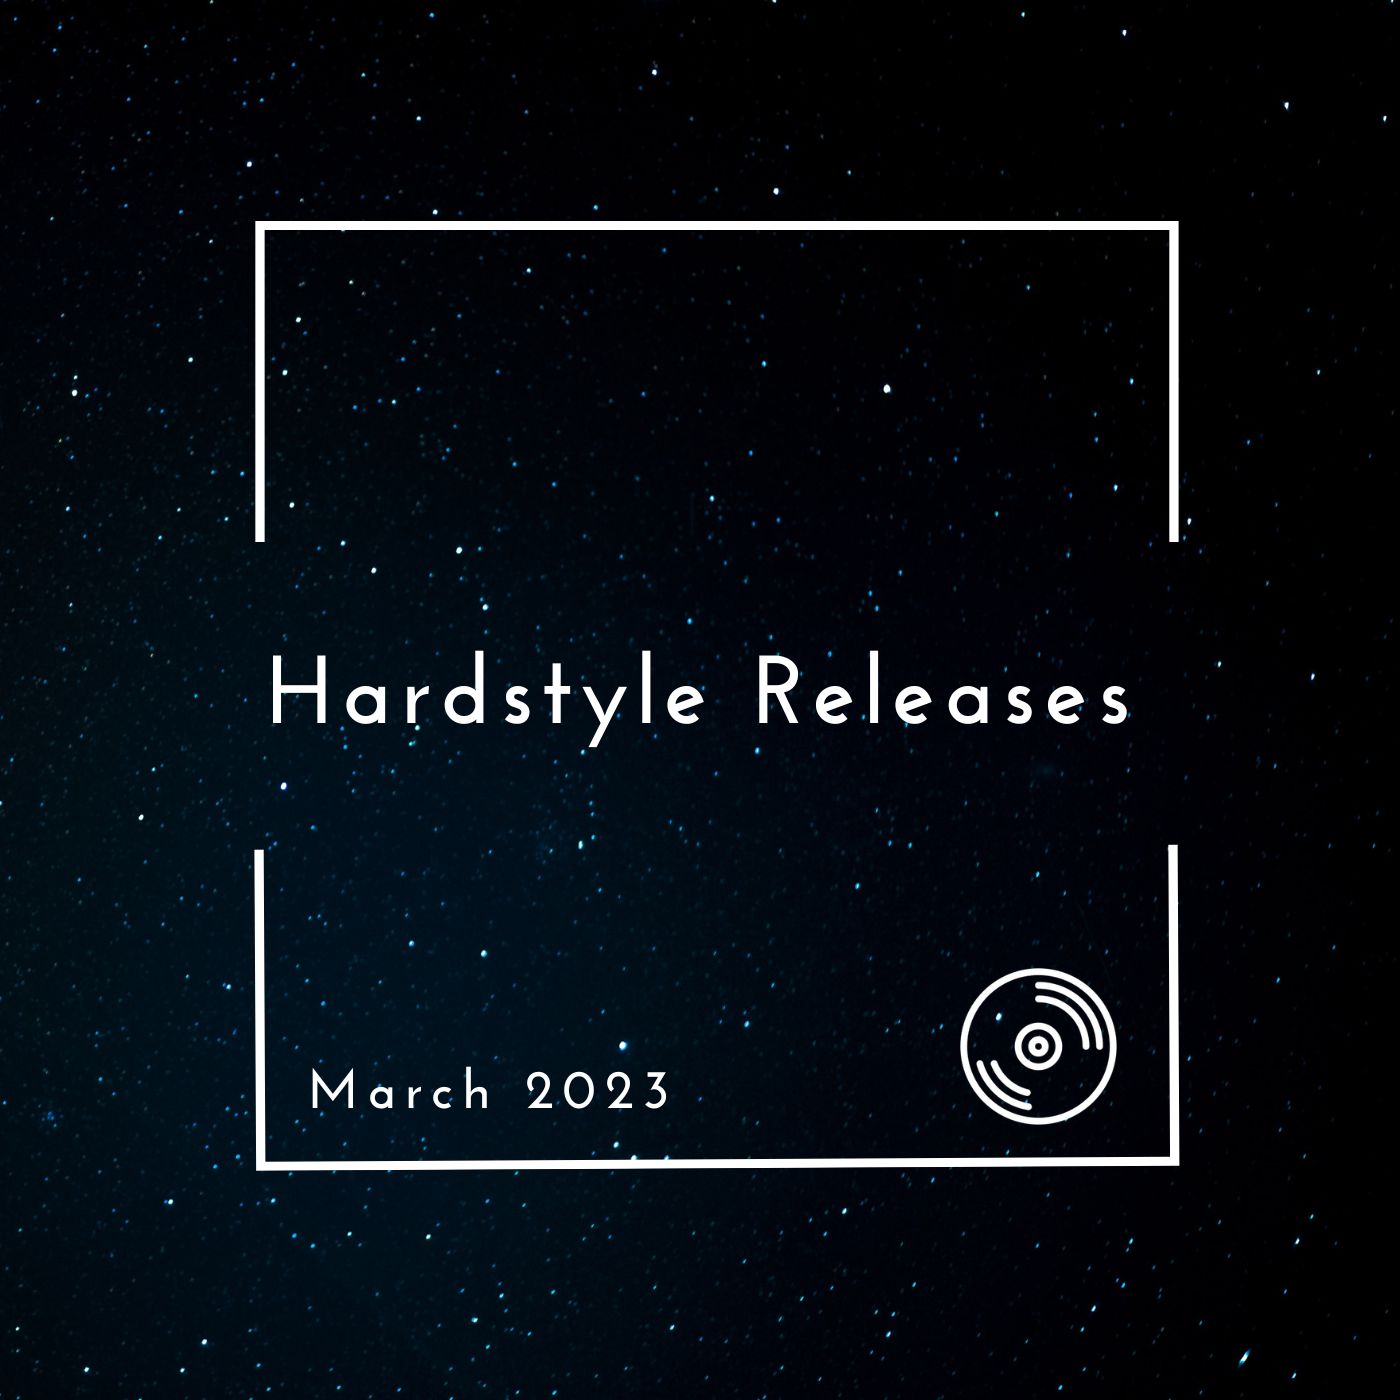 Hardstyle Releases March 2023